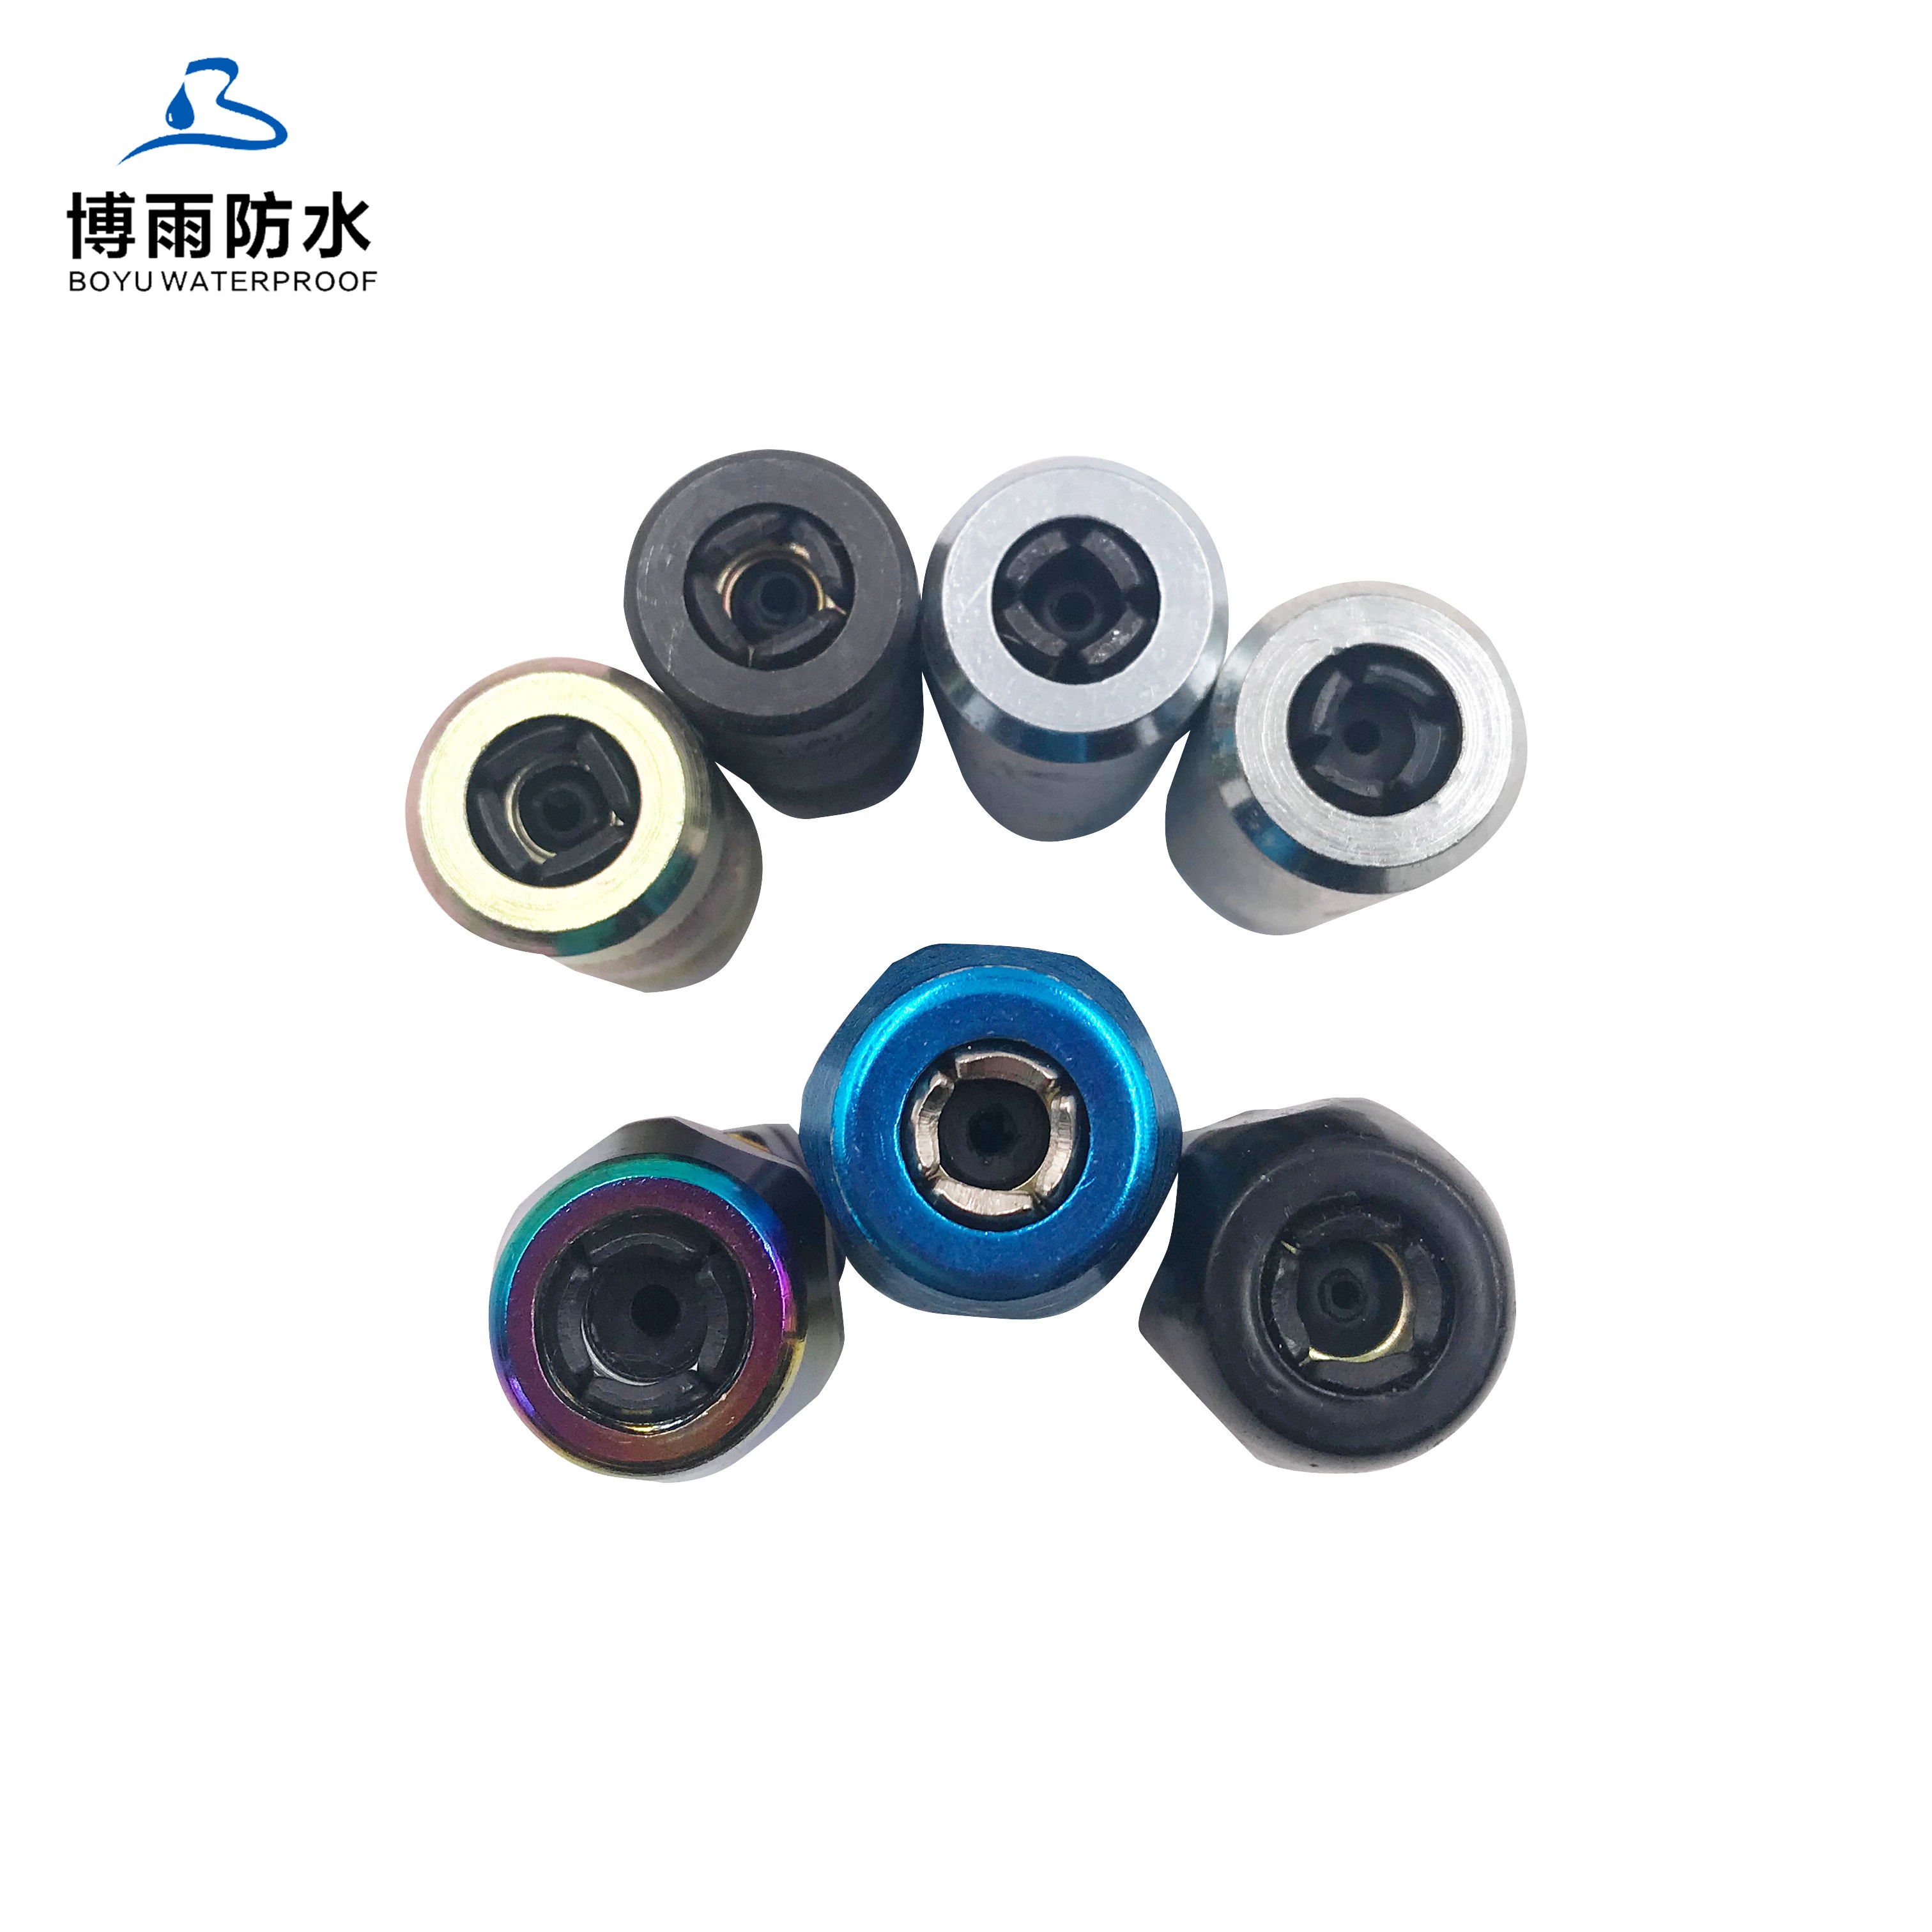 Hexagon Stainless Steel Grease Nipple Coupler for Building Coating